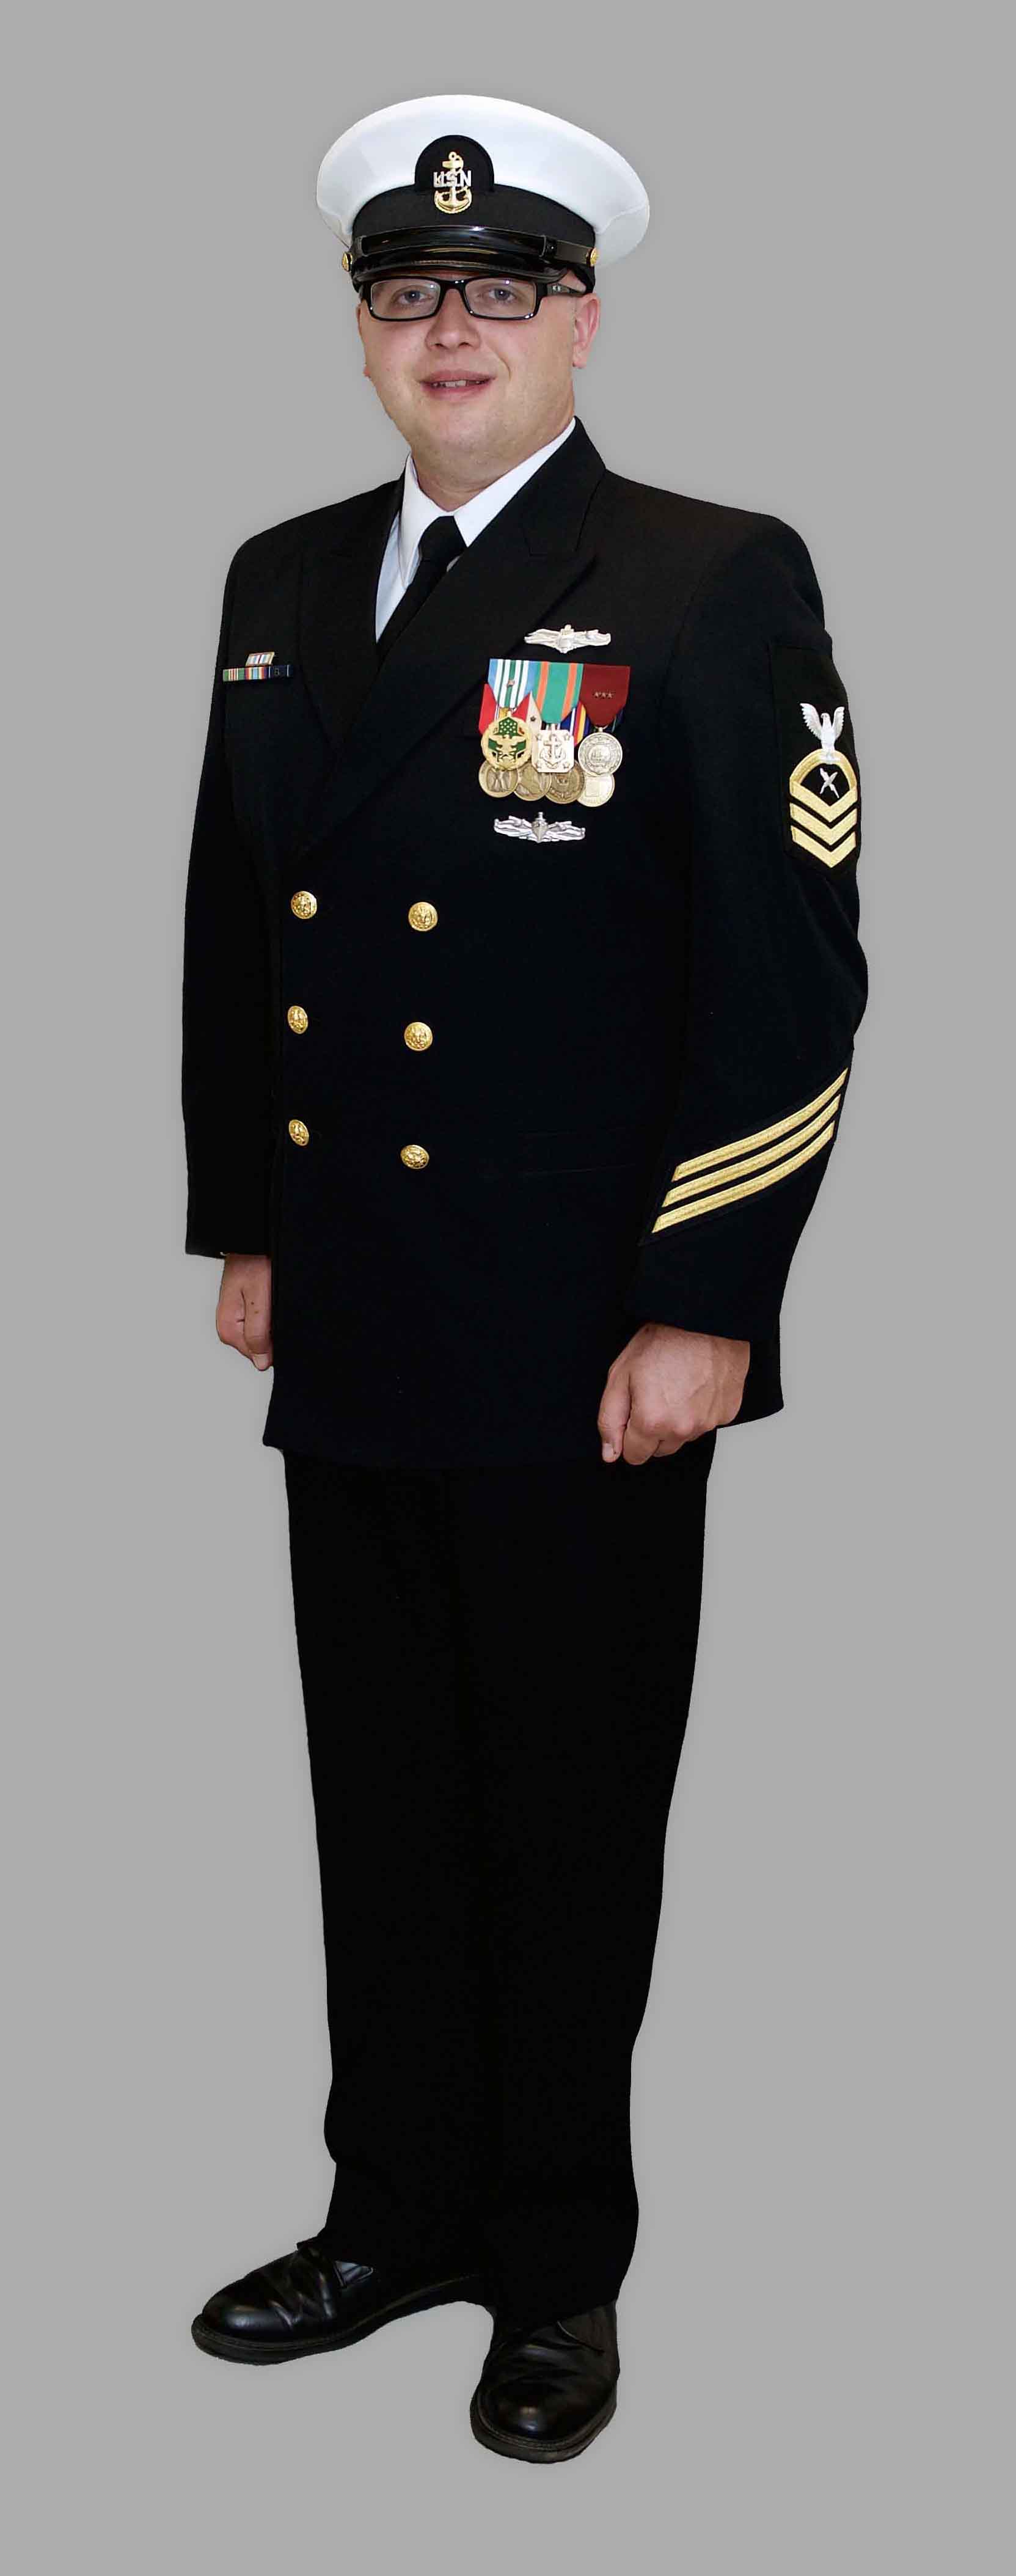 US Navy Chief Uniform: A Closer Look at the Iconic Dress Blues - News ...